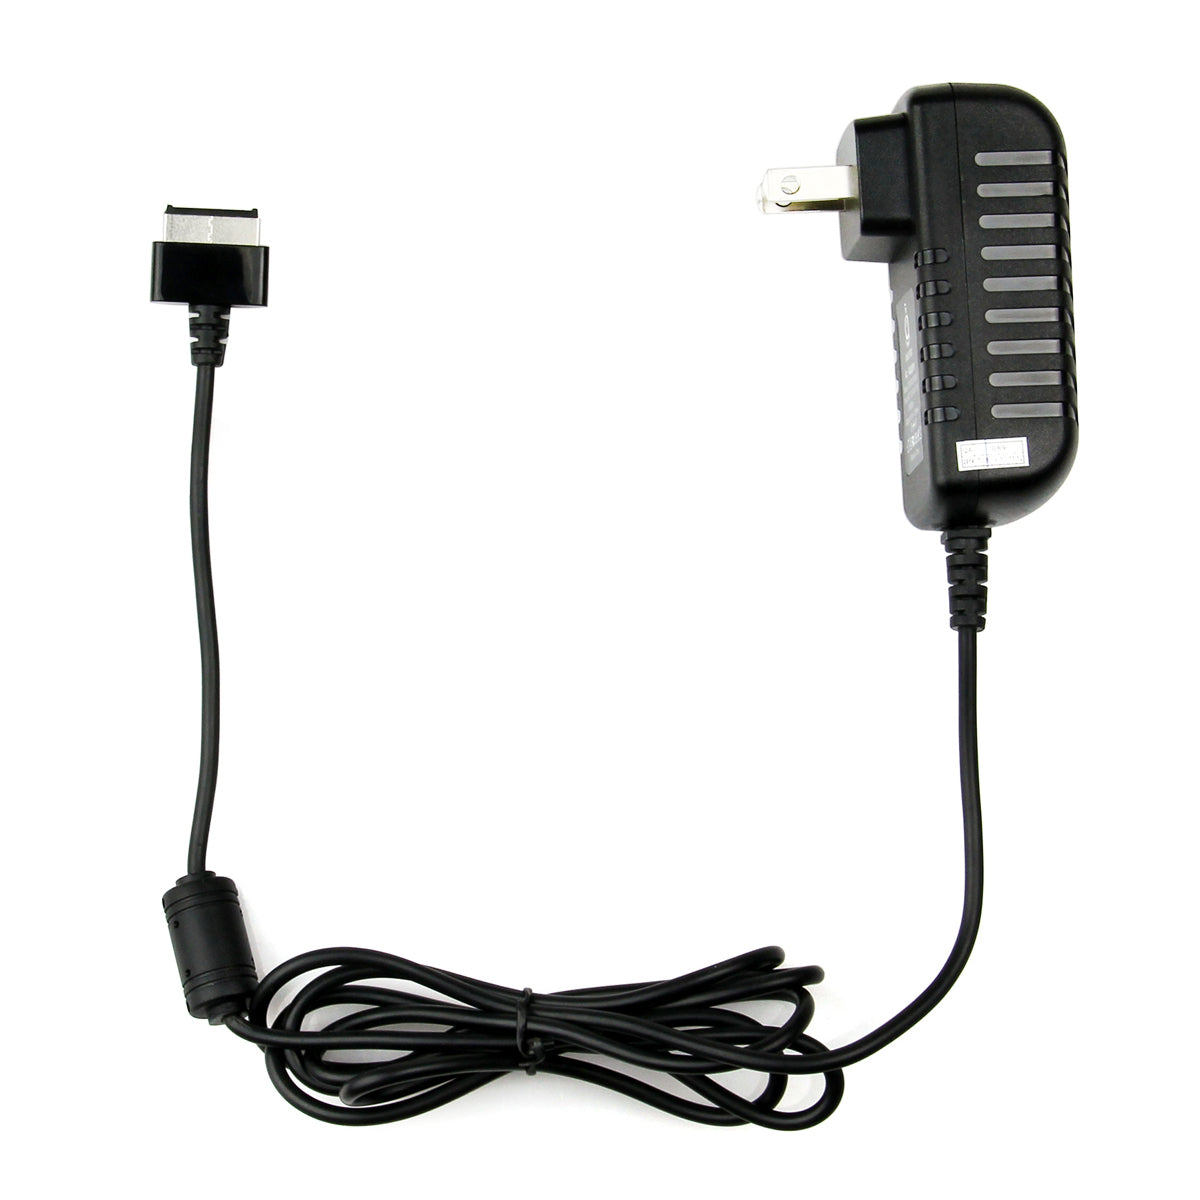 AC Adapter Charger for ASUS TF101G Tablet.